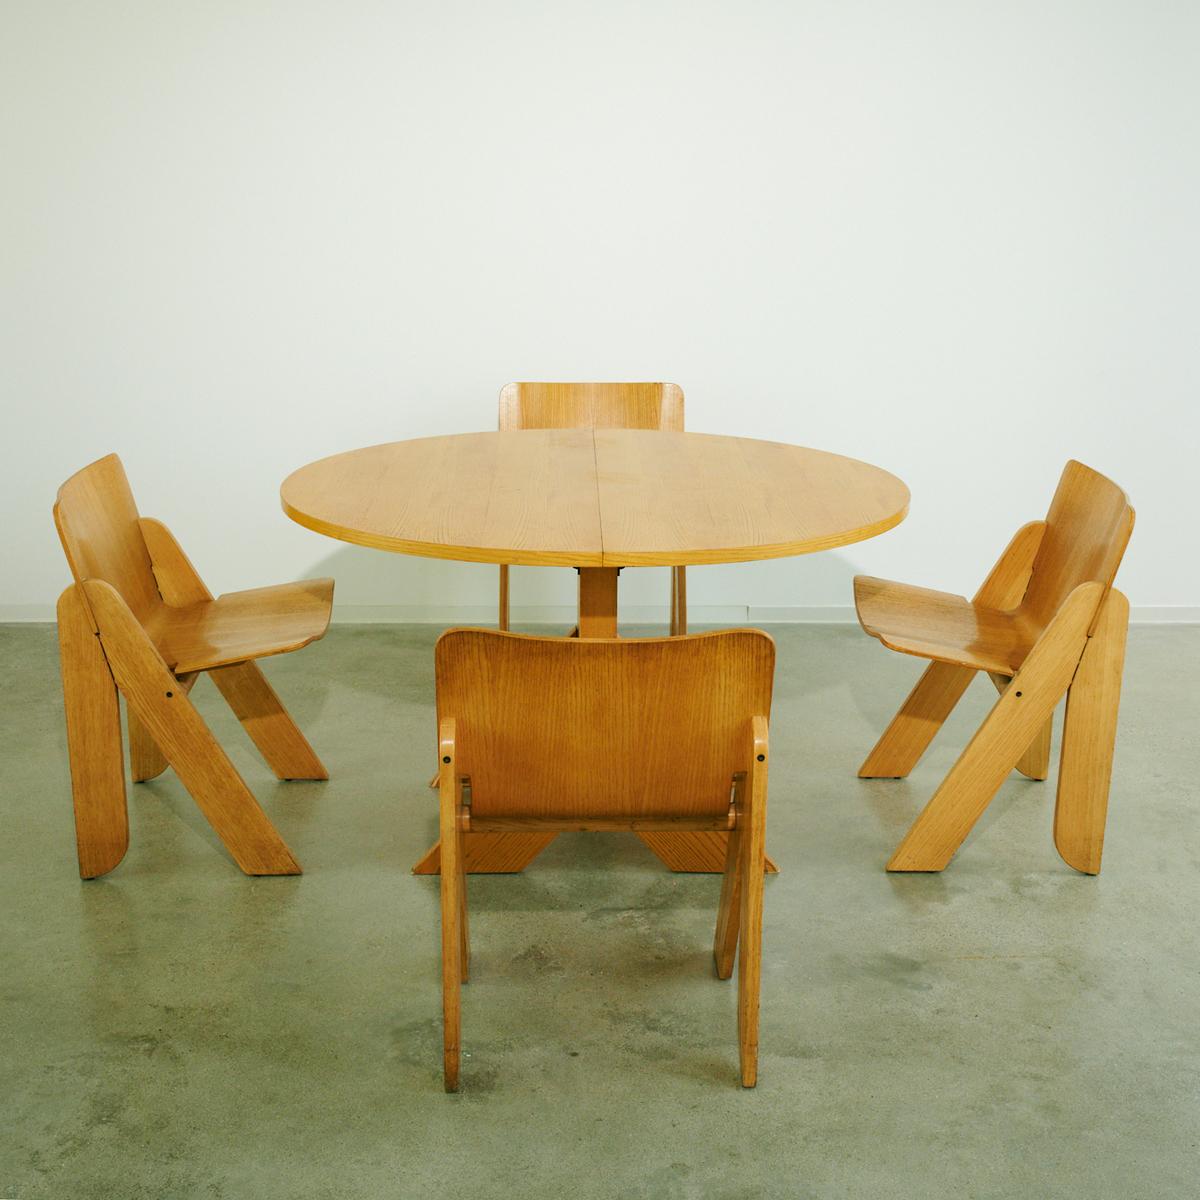 Set of wood table and four chairs by Gigi Sabadin, circa 1970

A suite of four chairs, with inverted V-shaped legs supporting the seat shells in thermoformed wood.
Stilwood edition. Circa 1970
Table 72 x 120 x 100 cm
Table with extensions 153